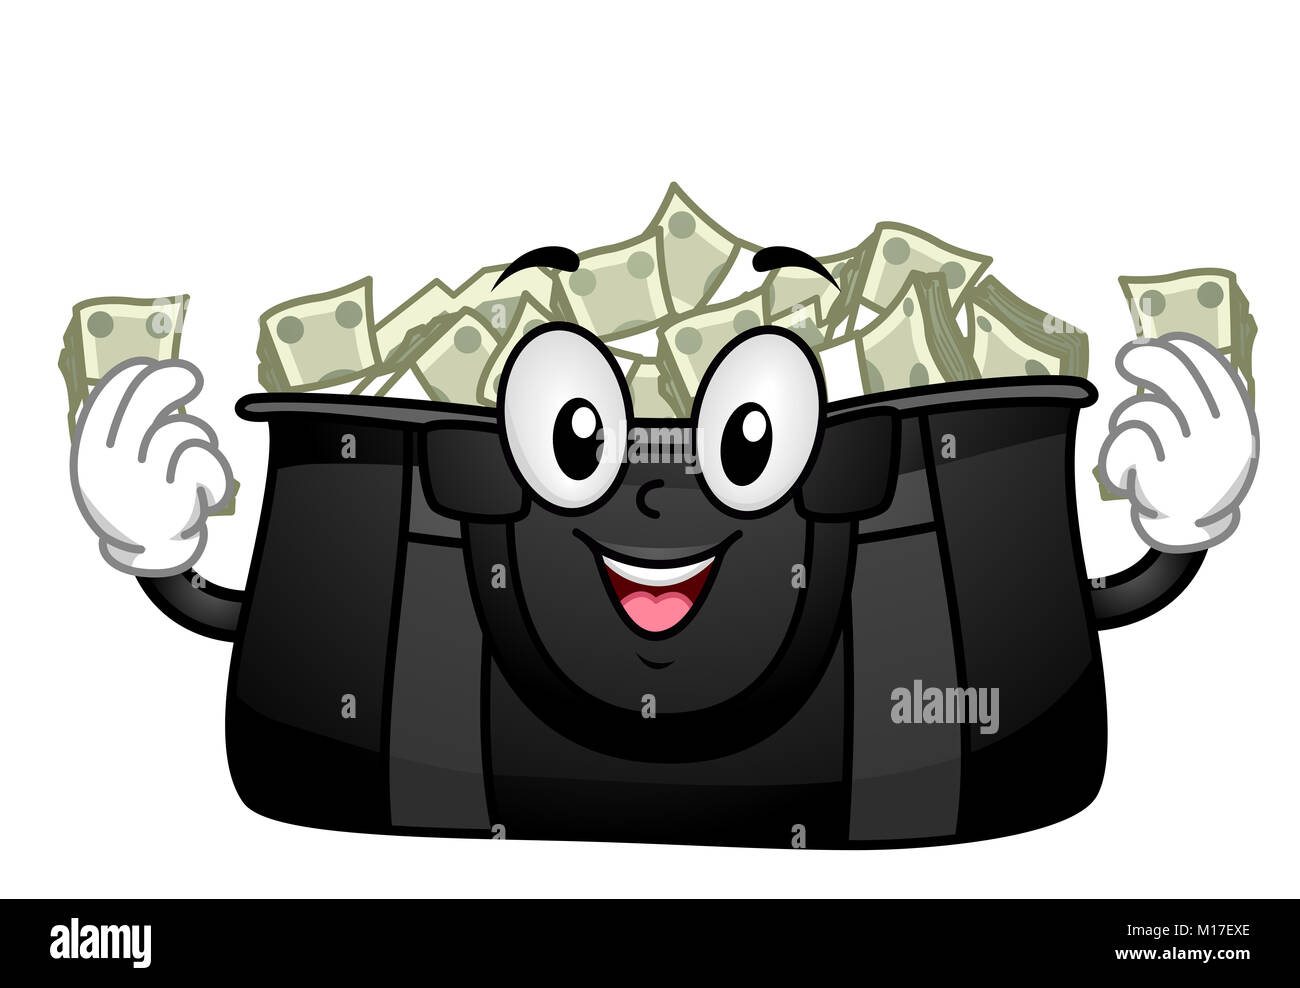 Duffel Bag Full Of Money Stock Photo - Download Image Now - Gym Bag,  Currency, Bag - iStock